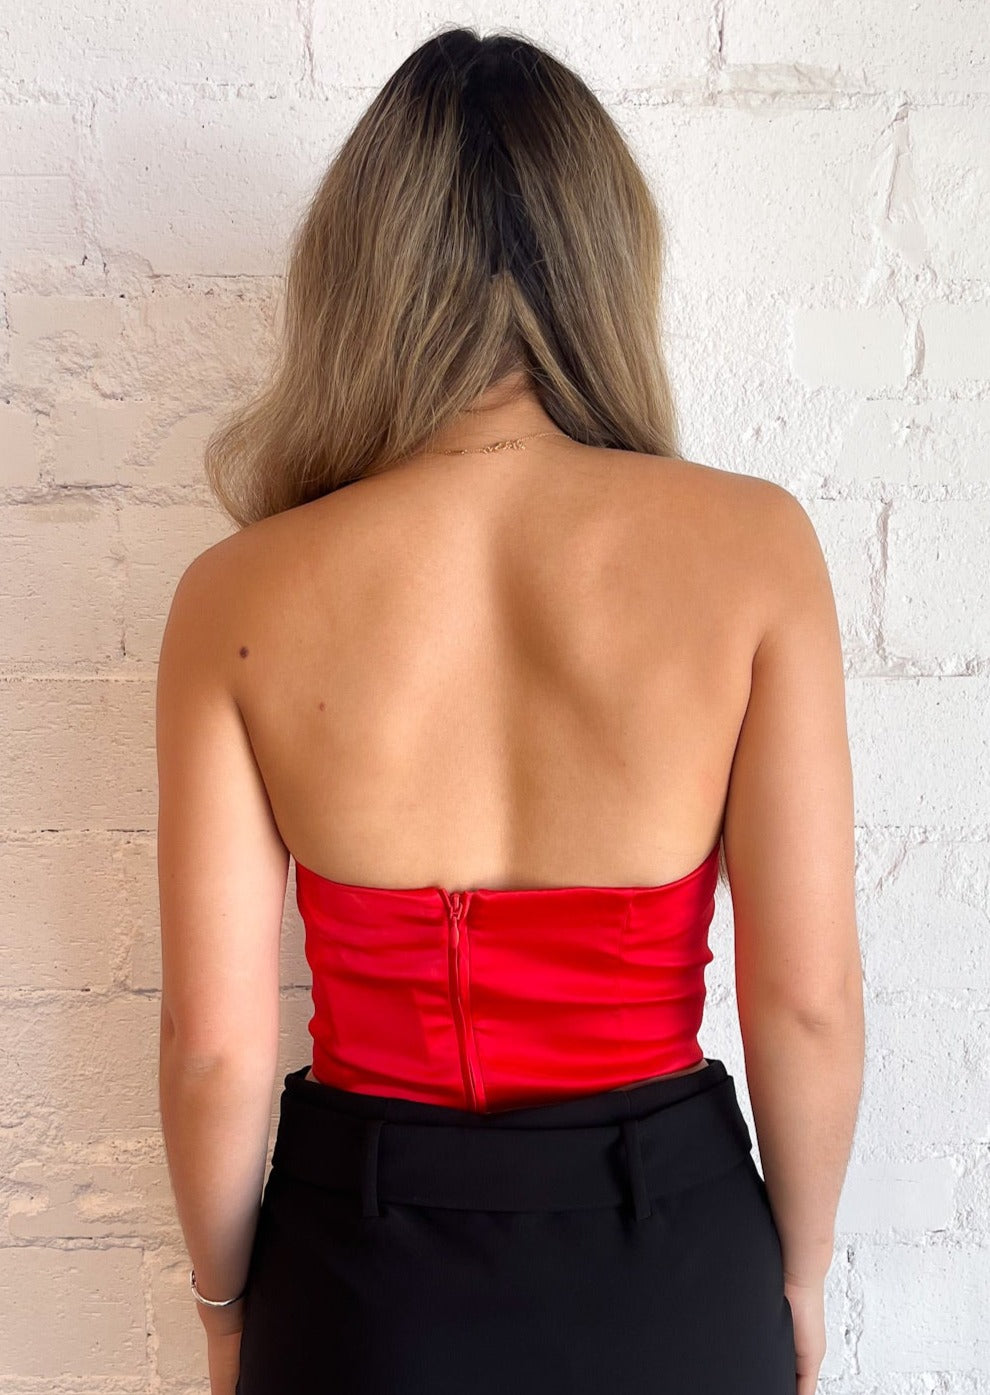 Satin Strapless Curved Top, Tops, Adeline, Adeline, dallas boutique, dallas texas, texas boutique, women's boutique dallas, adeline boutique, dallas boutique, trendy boutique, affordable boutique